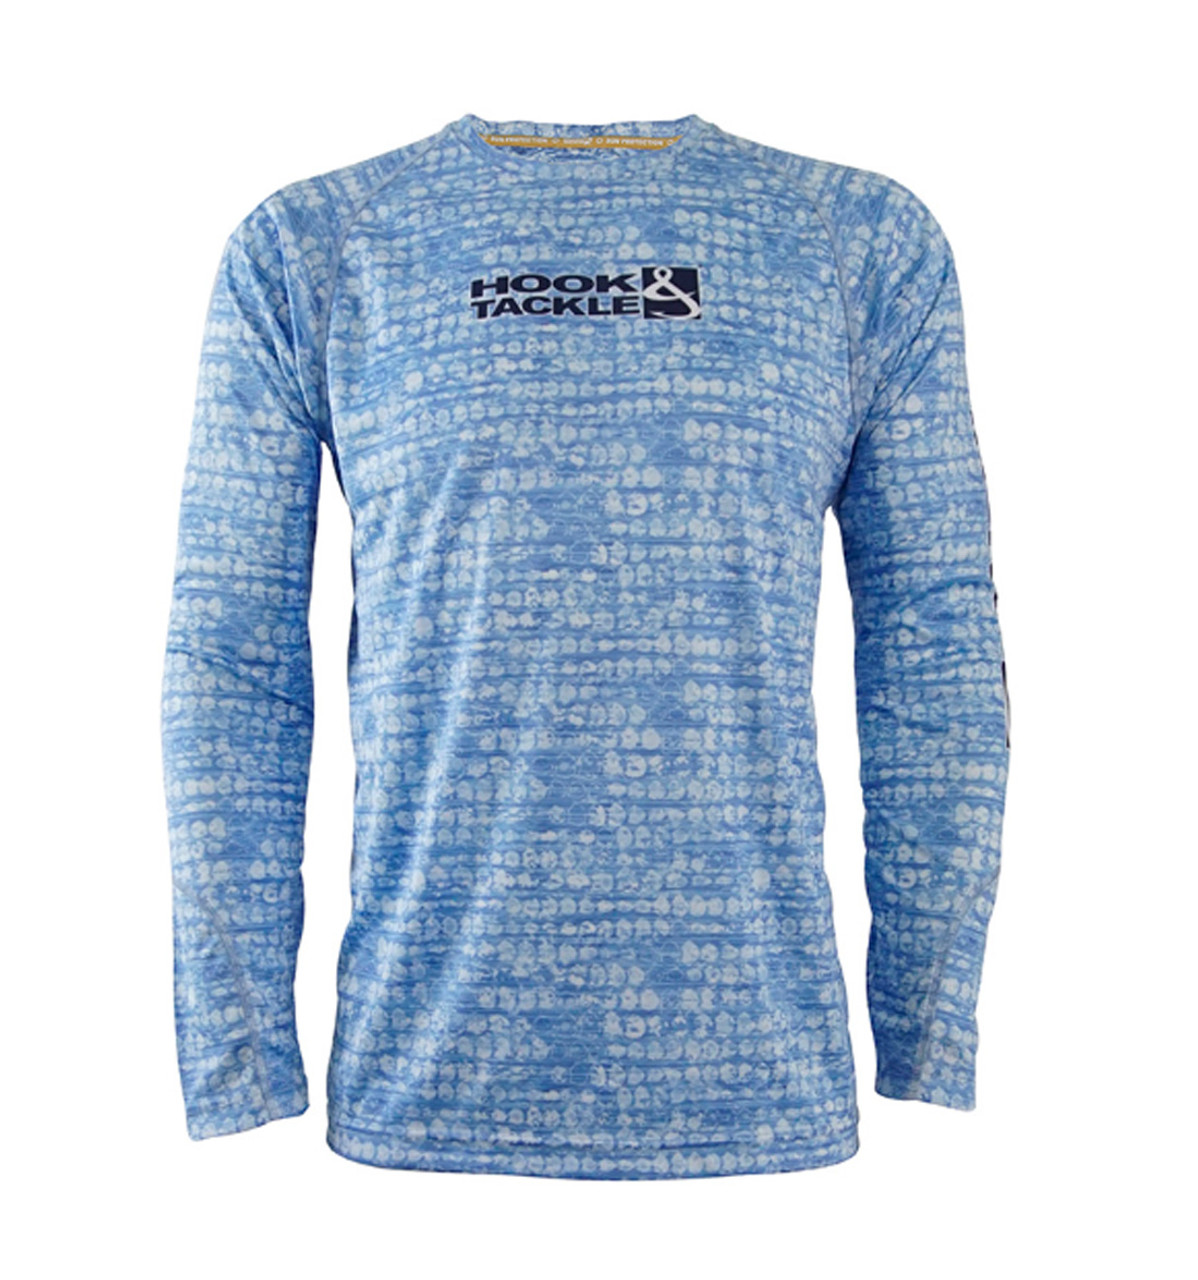 Textron Tech Tee by Hook & Tackle